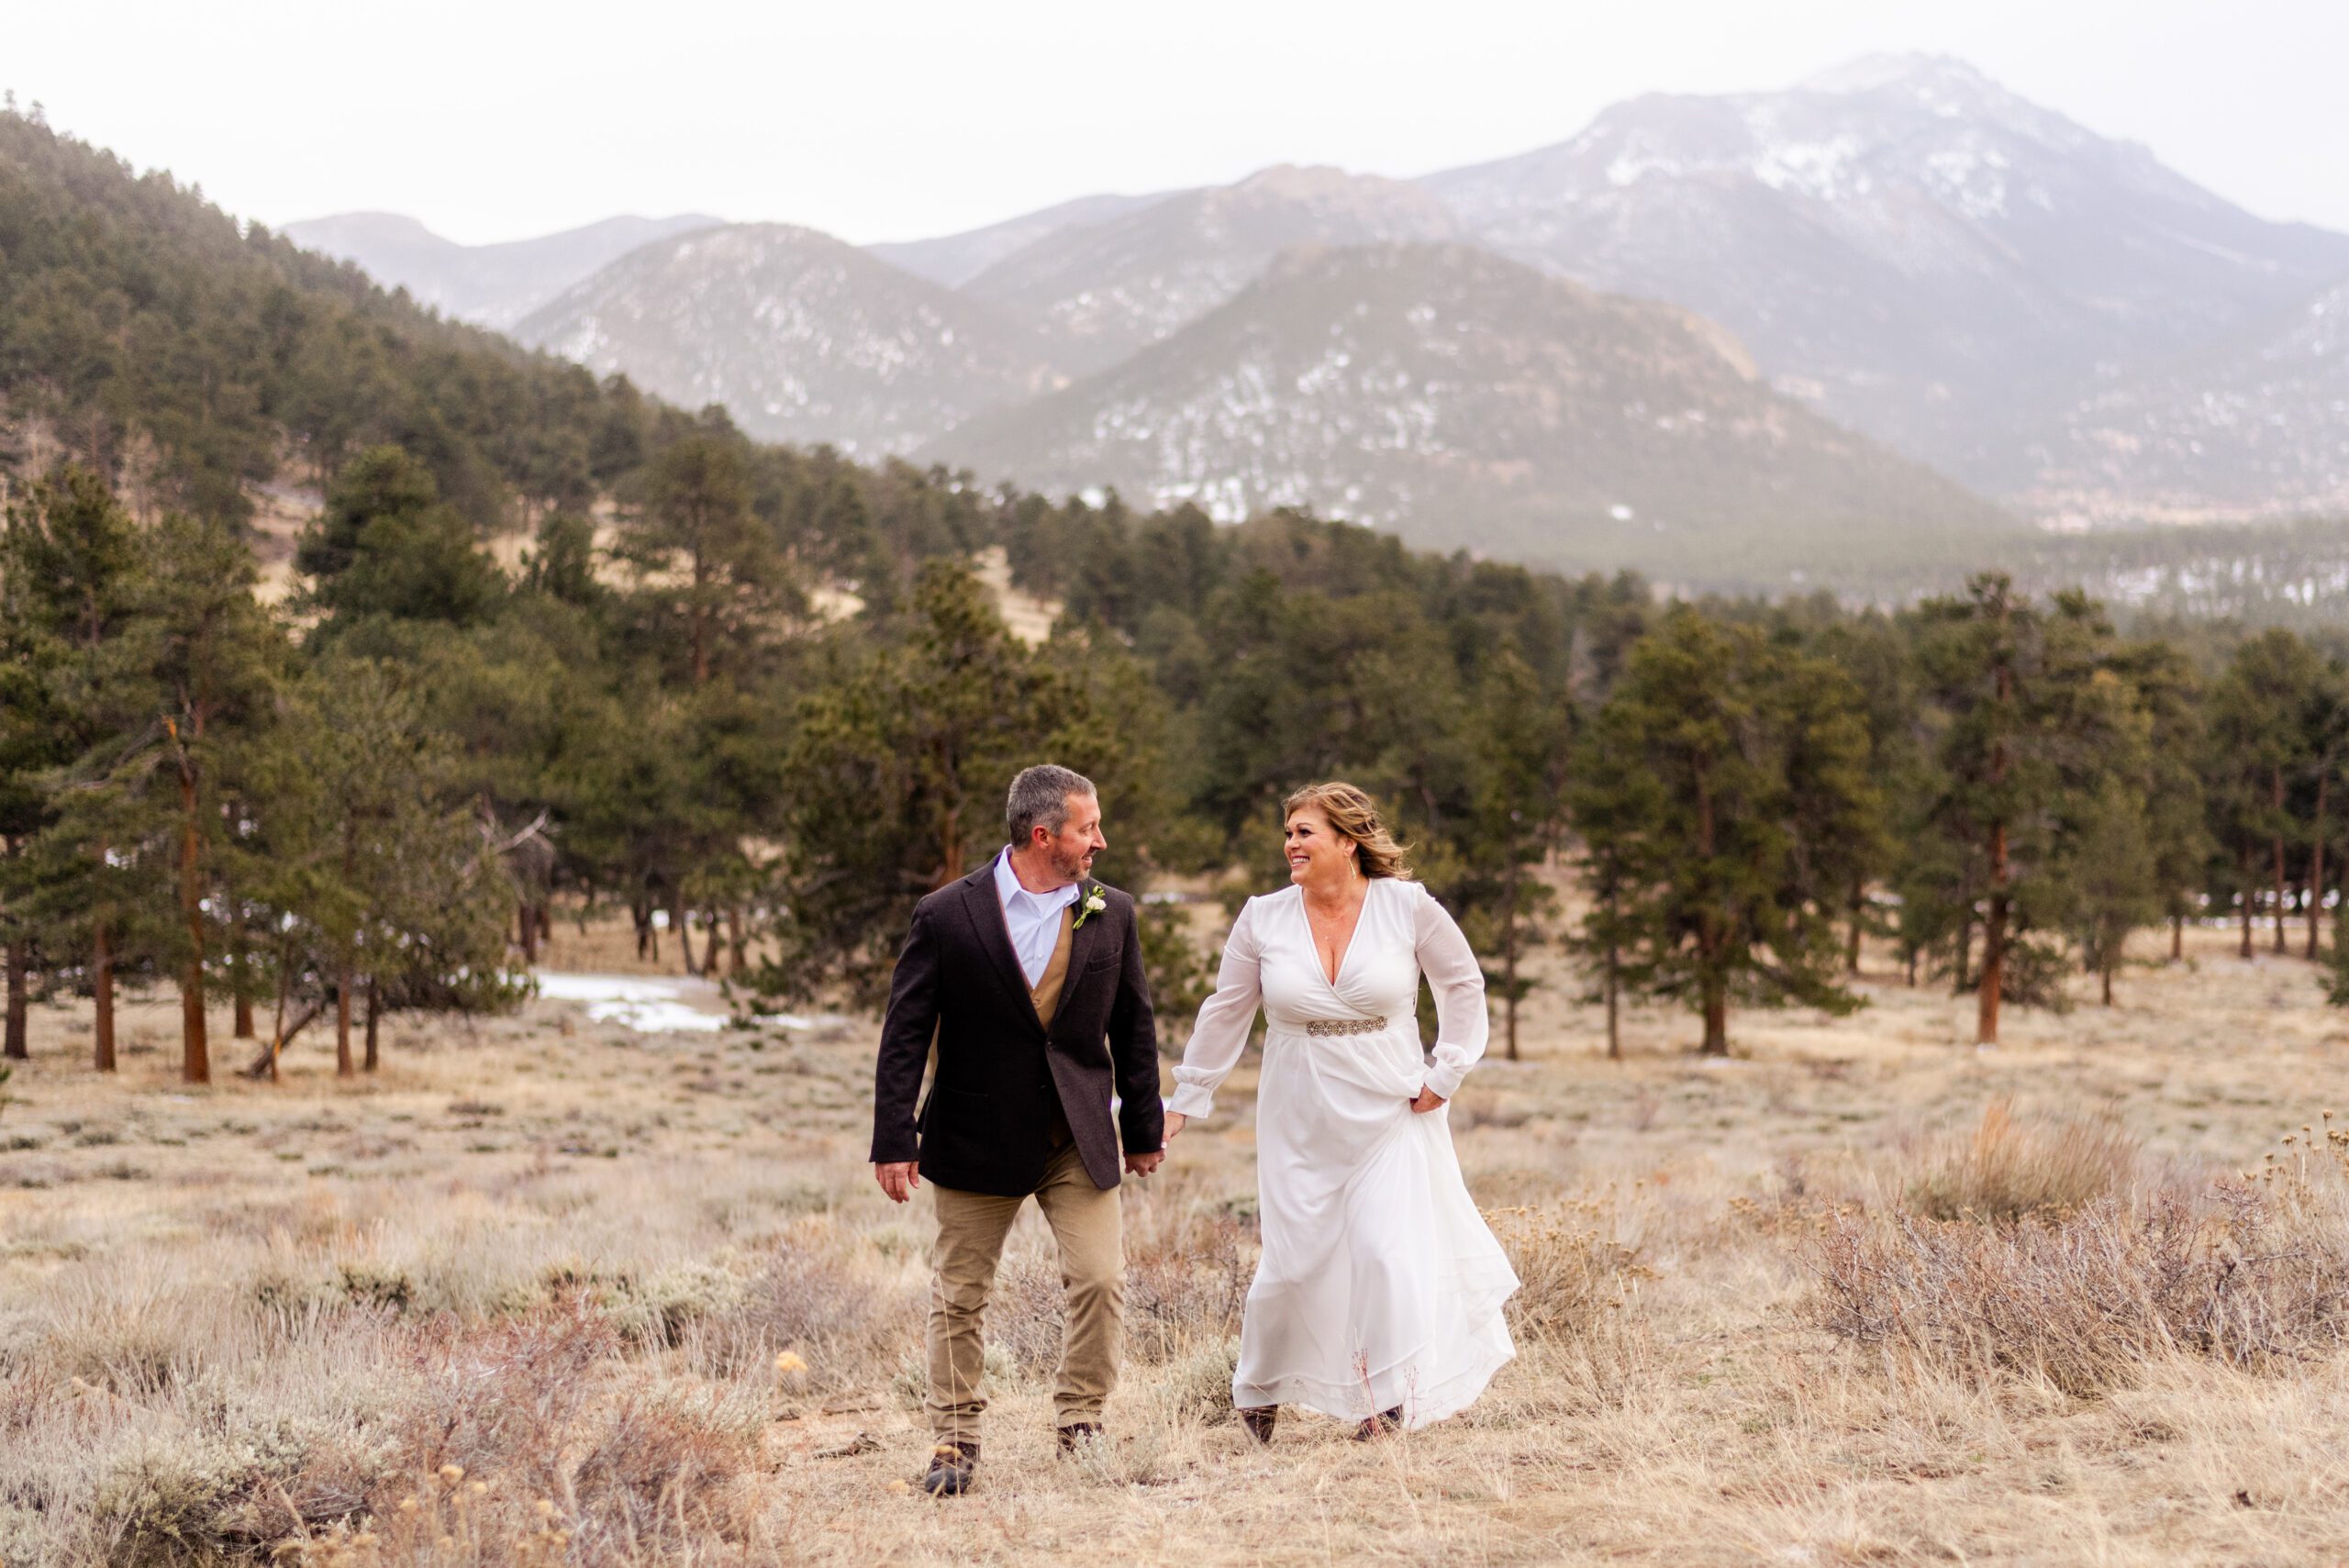 the bride and groom walking in the meadow at their spring elopement at 3M Curve.